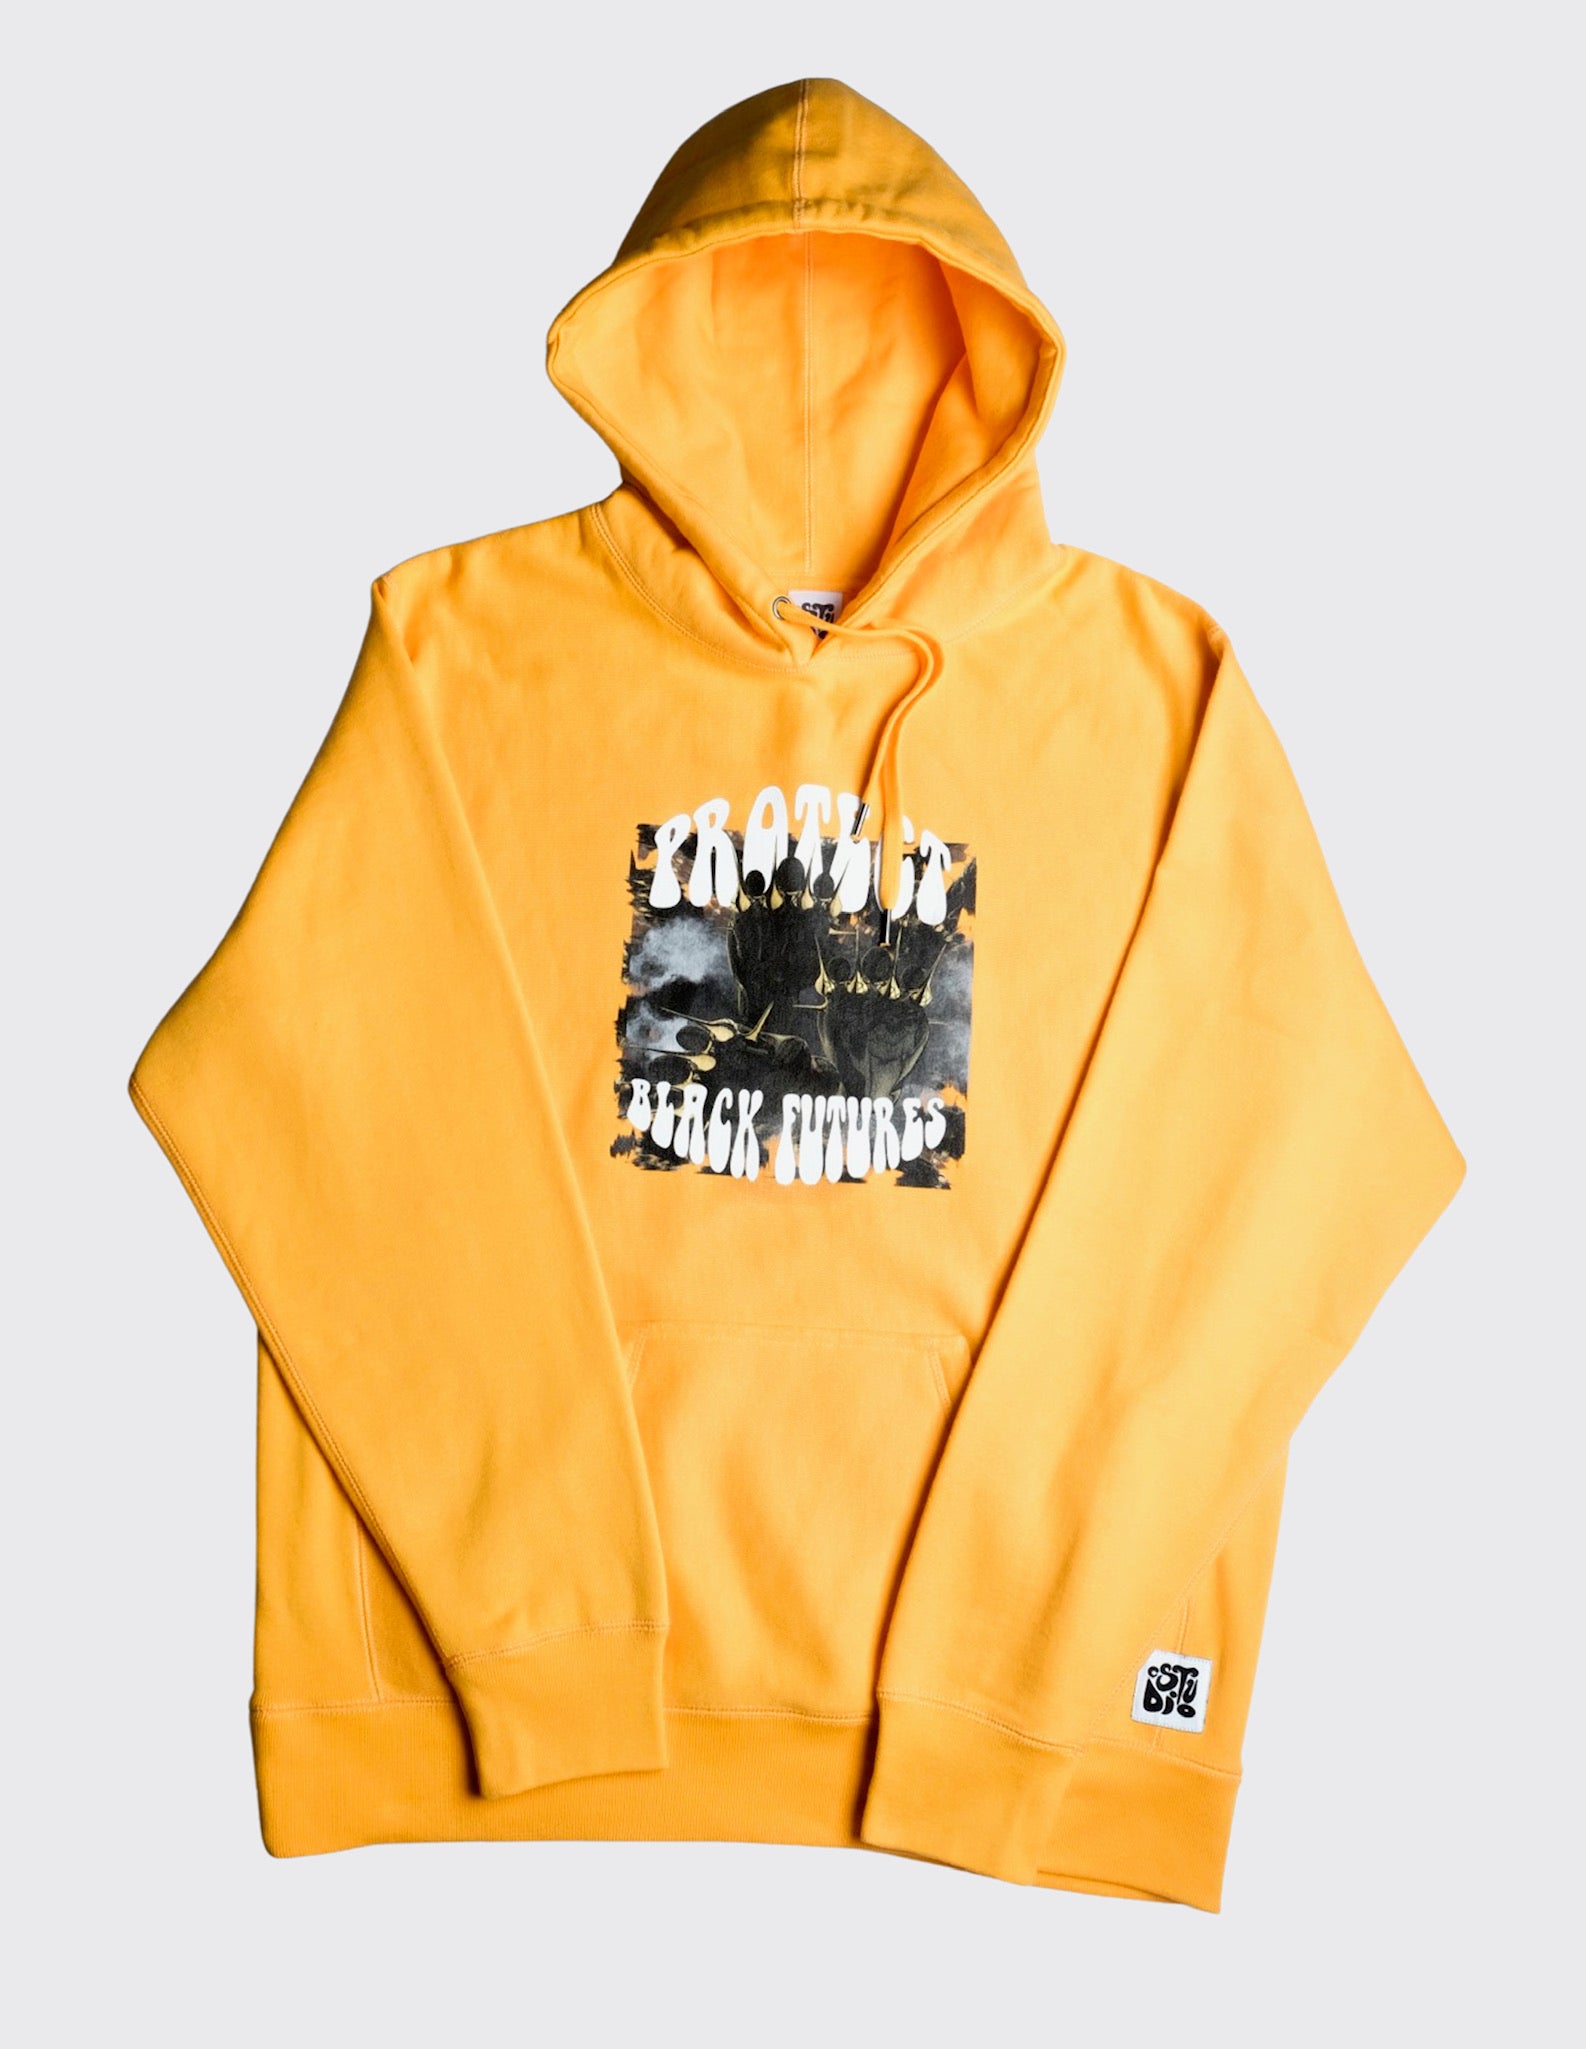 Edition of 20: Protect Black Futures Hoodie — Golden Rod